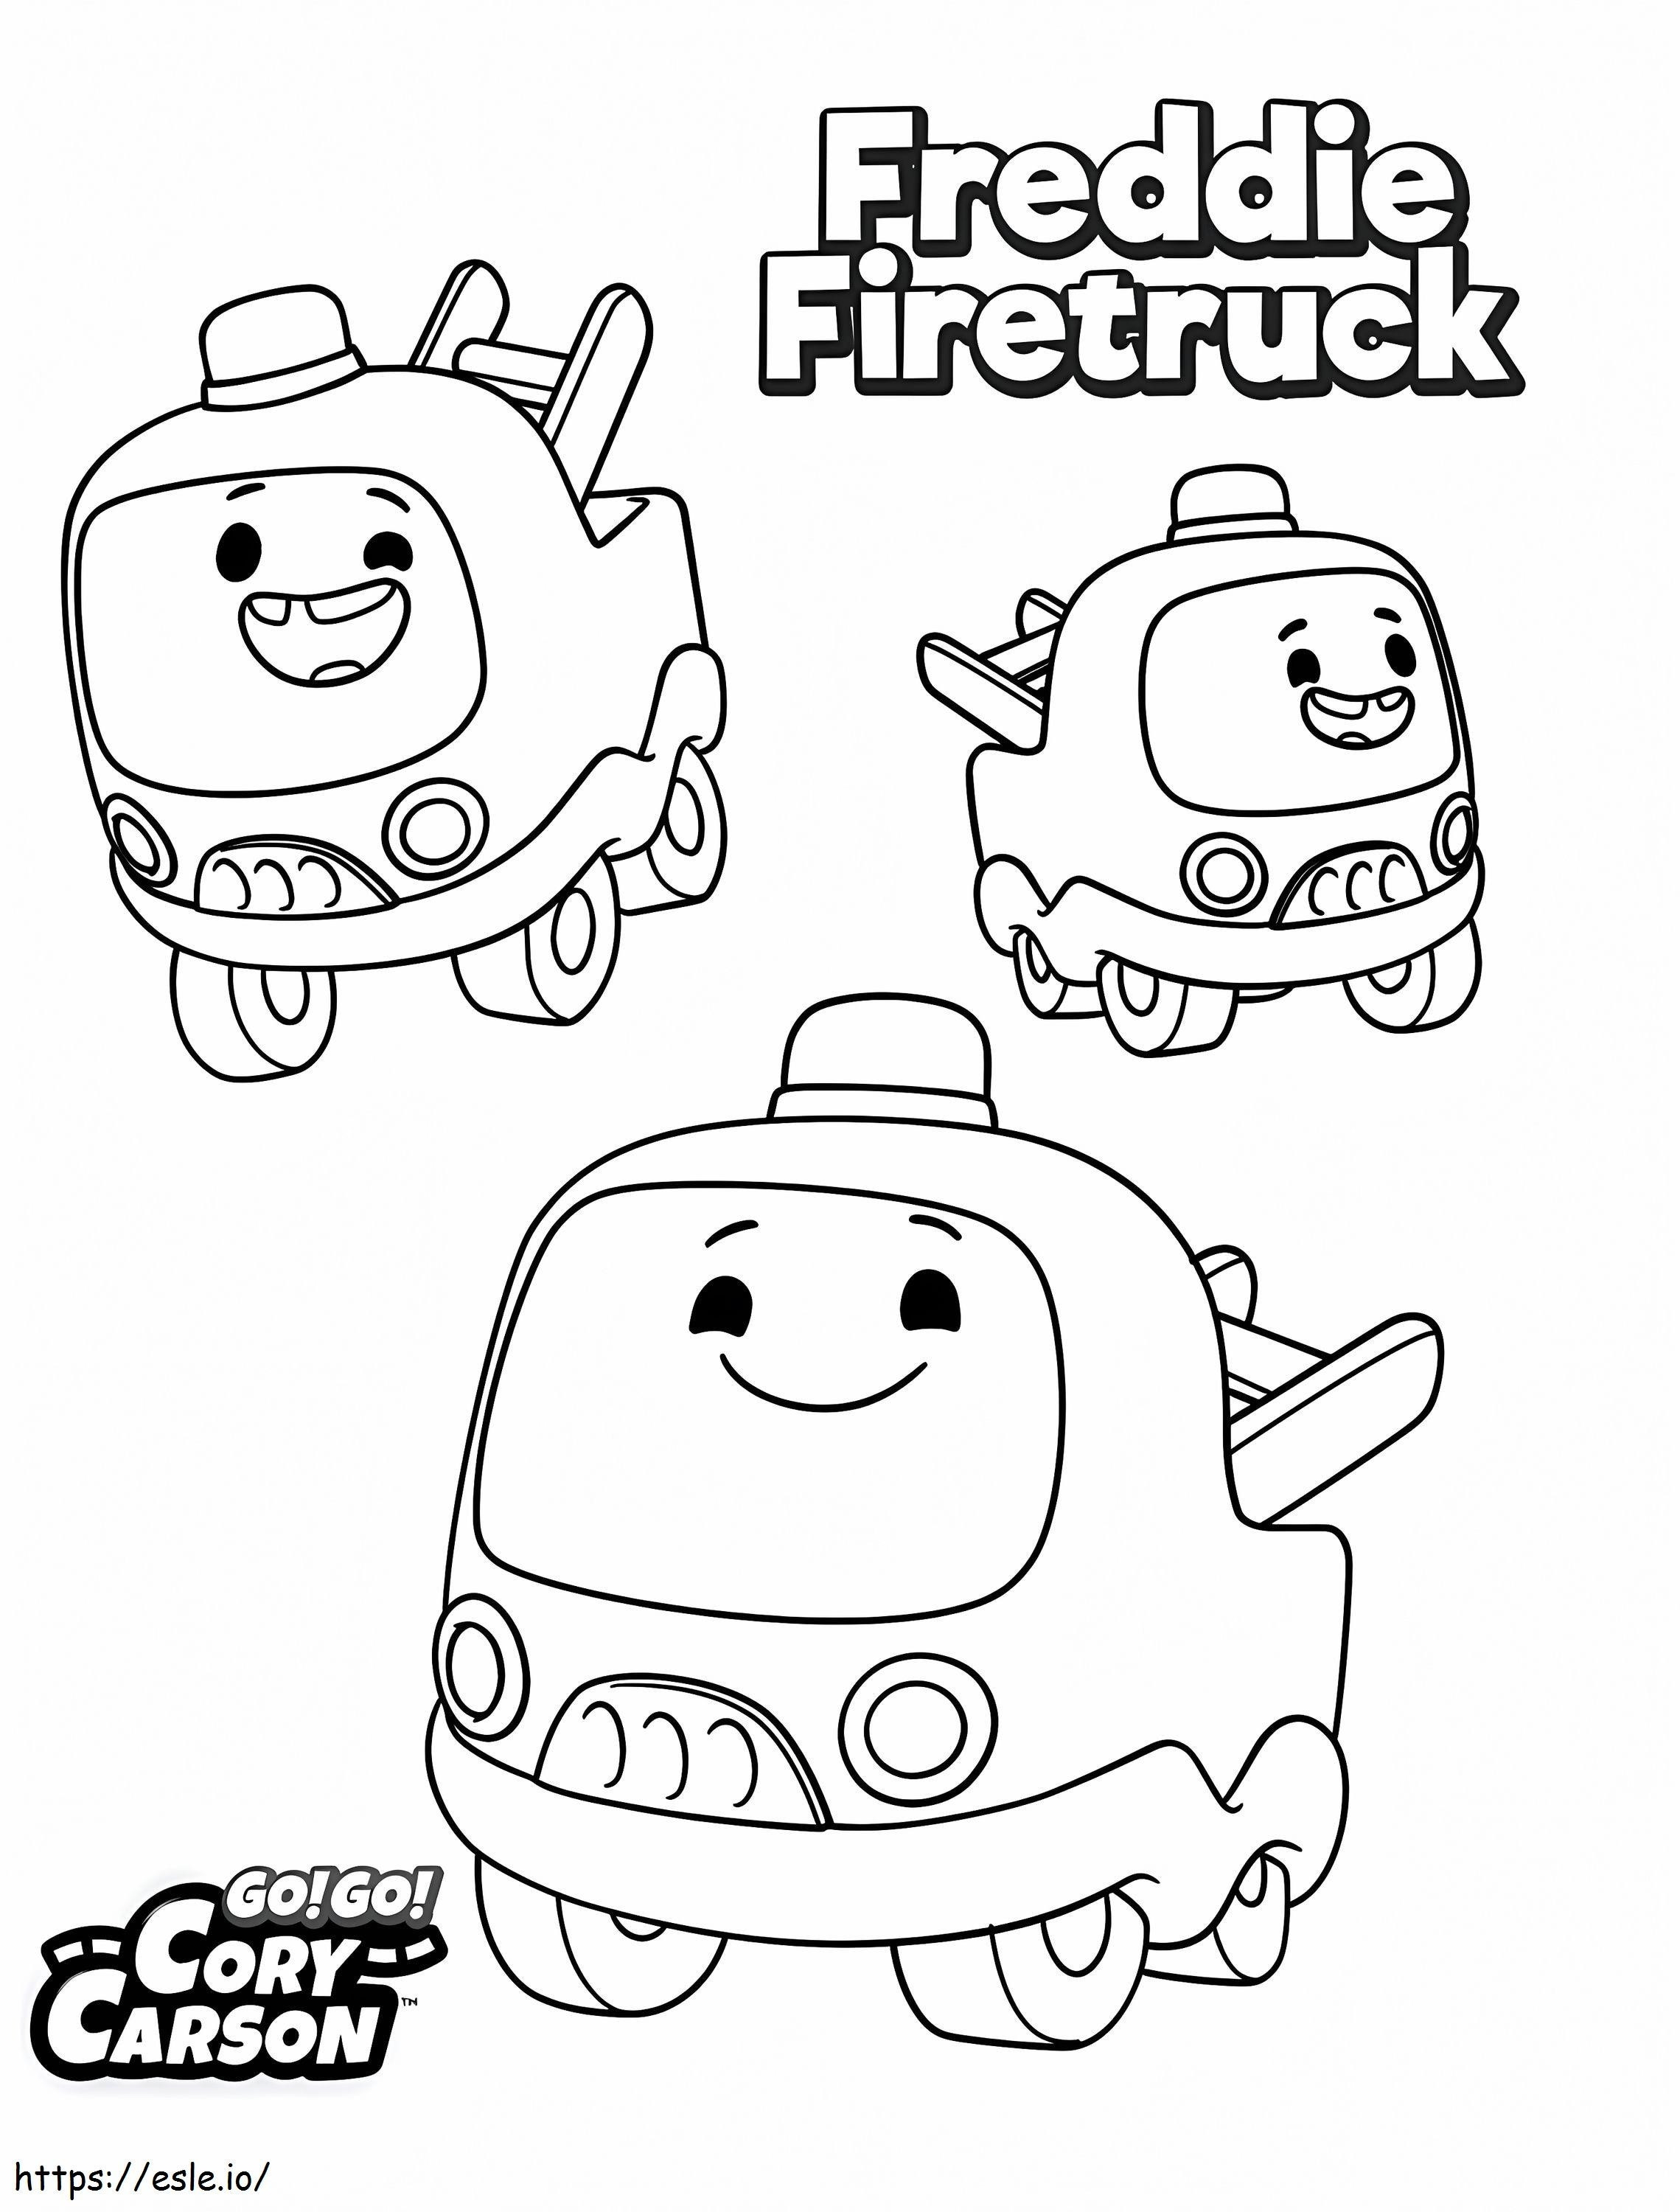 Freddie Firetruck From Go Go Cory Carson coloring page